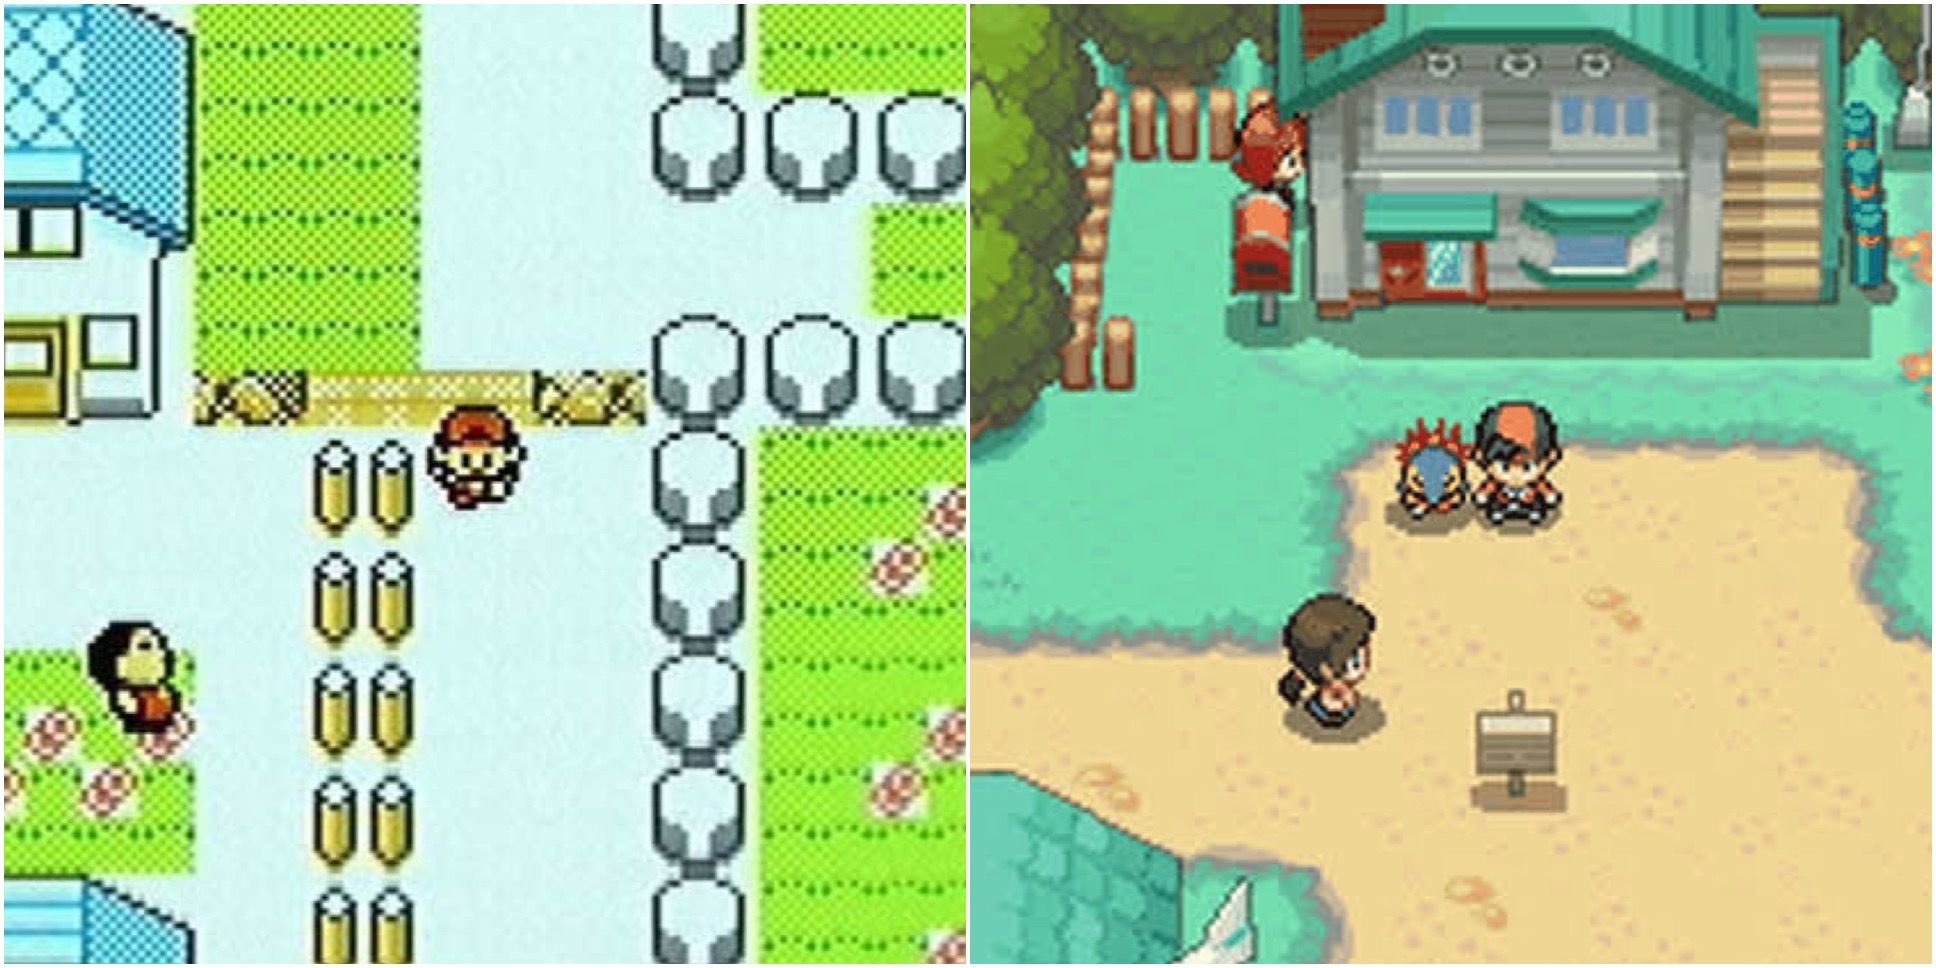 Pokemon Gold and Silver, and Pokemon heart gold and soul silver